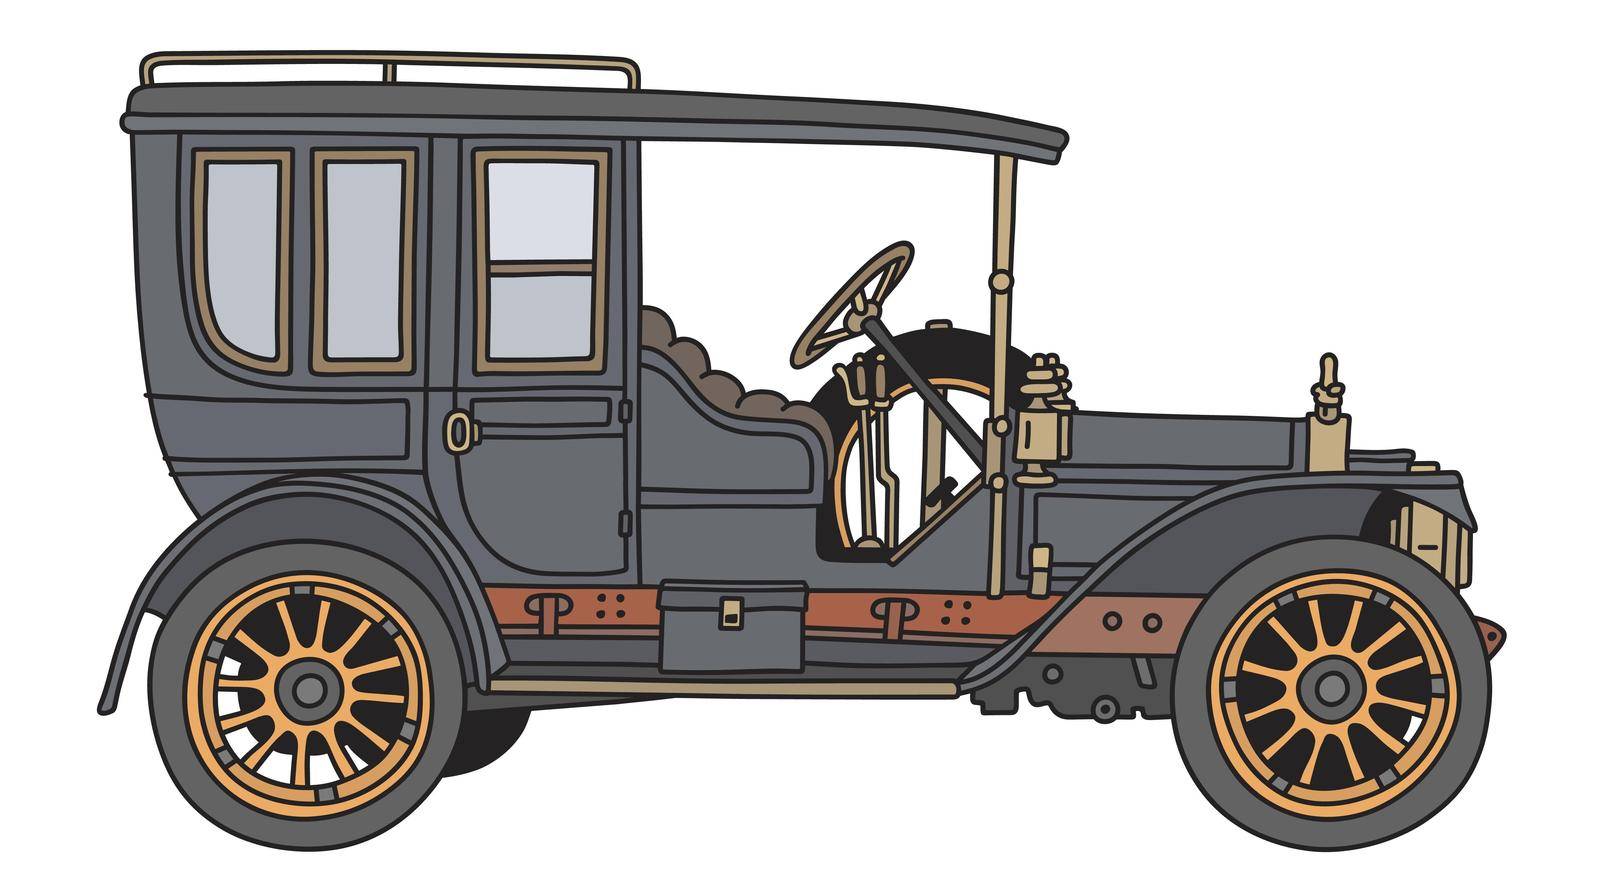 The vectorized hand drawing of a vintage black car